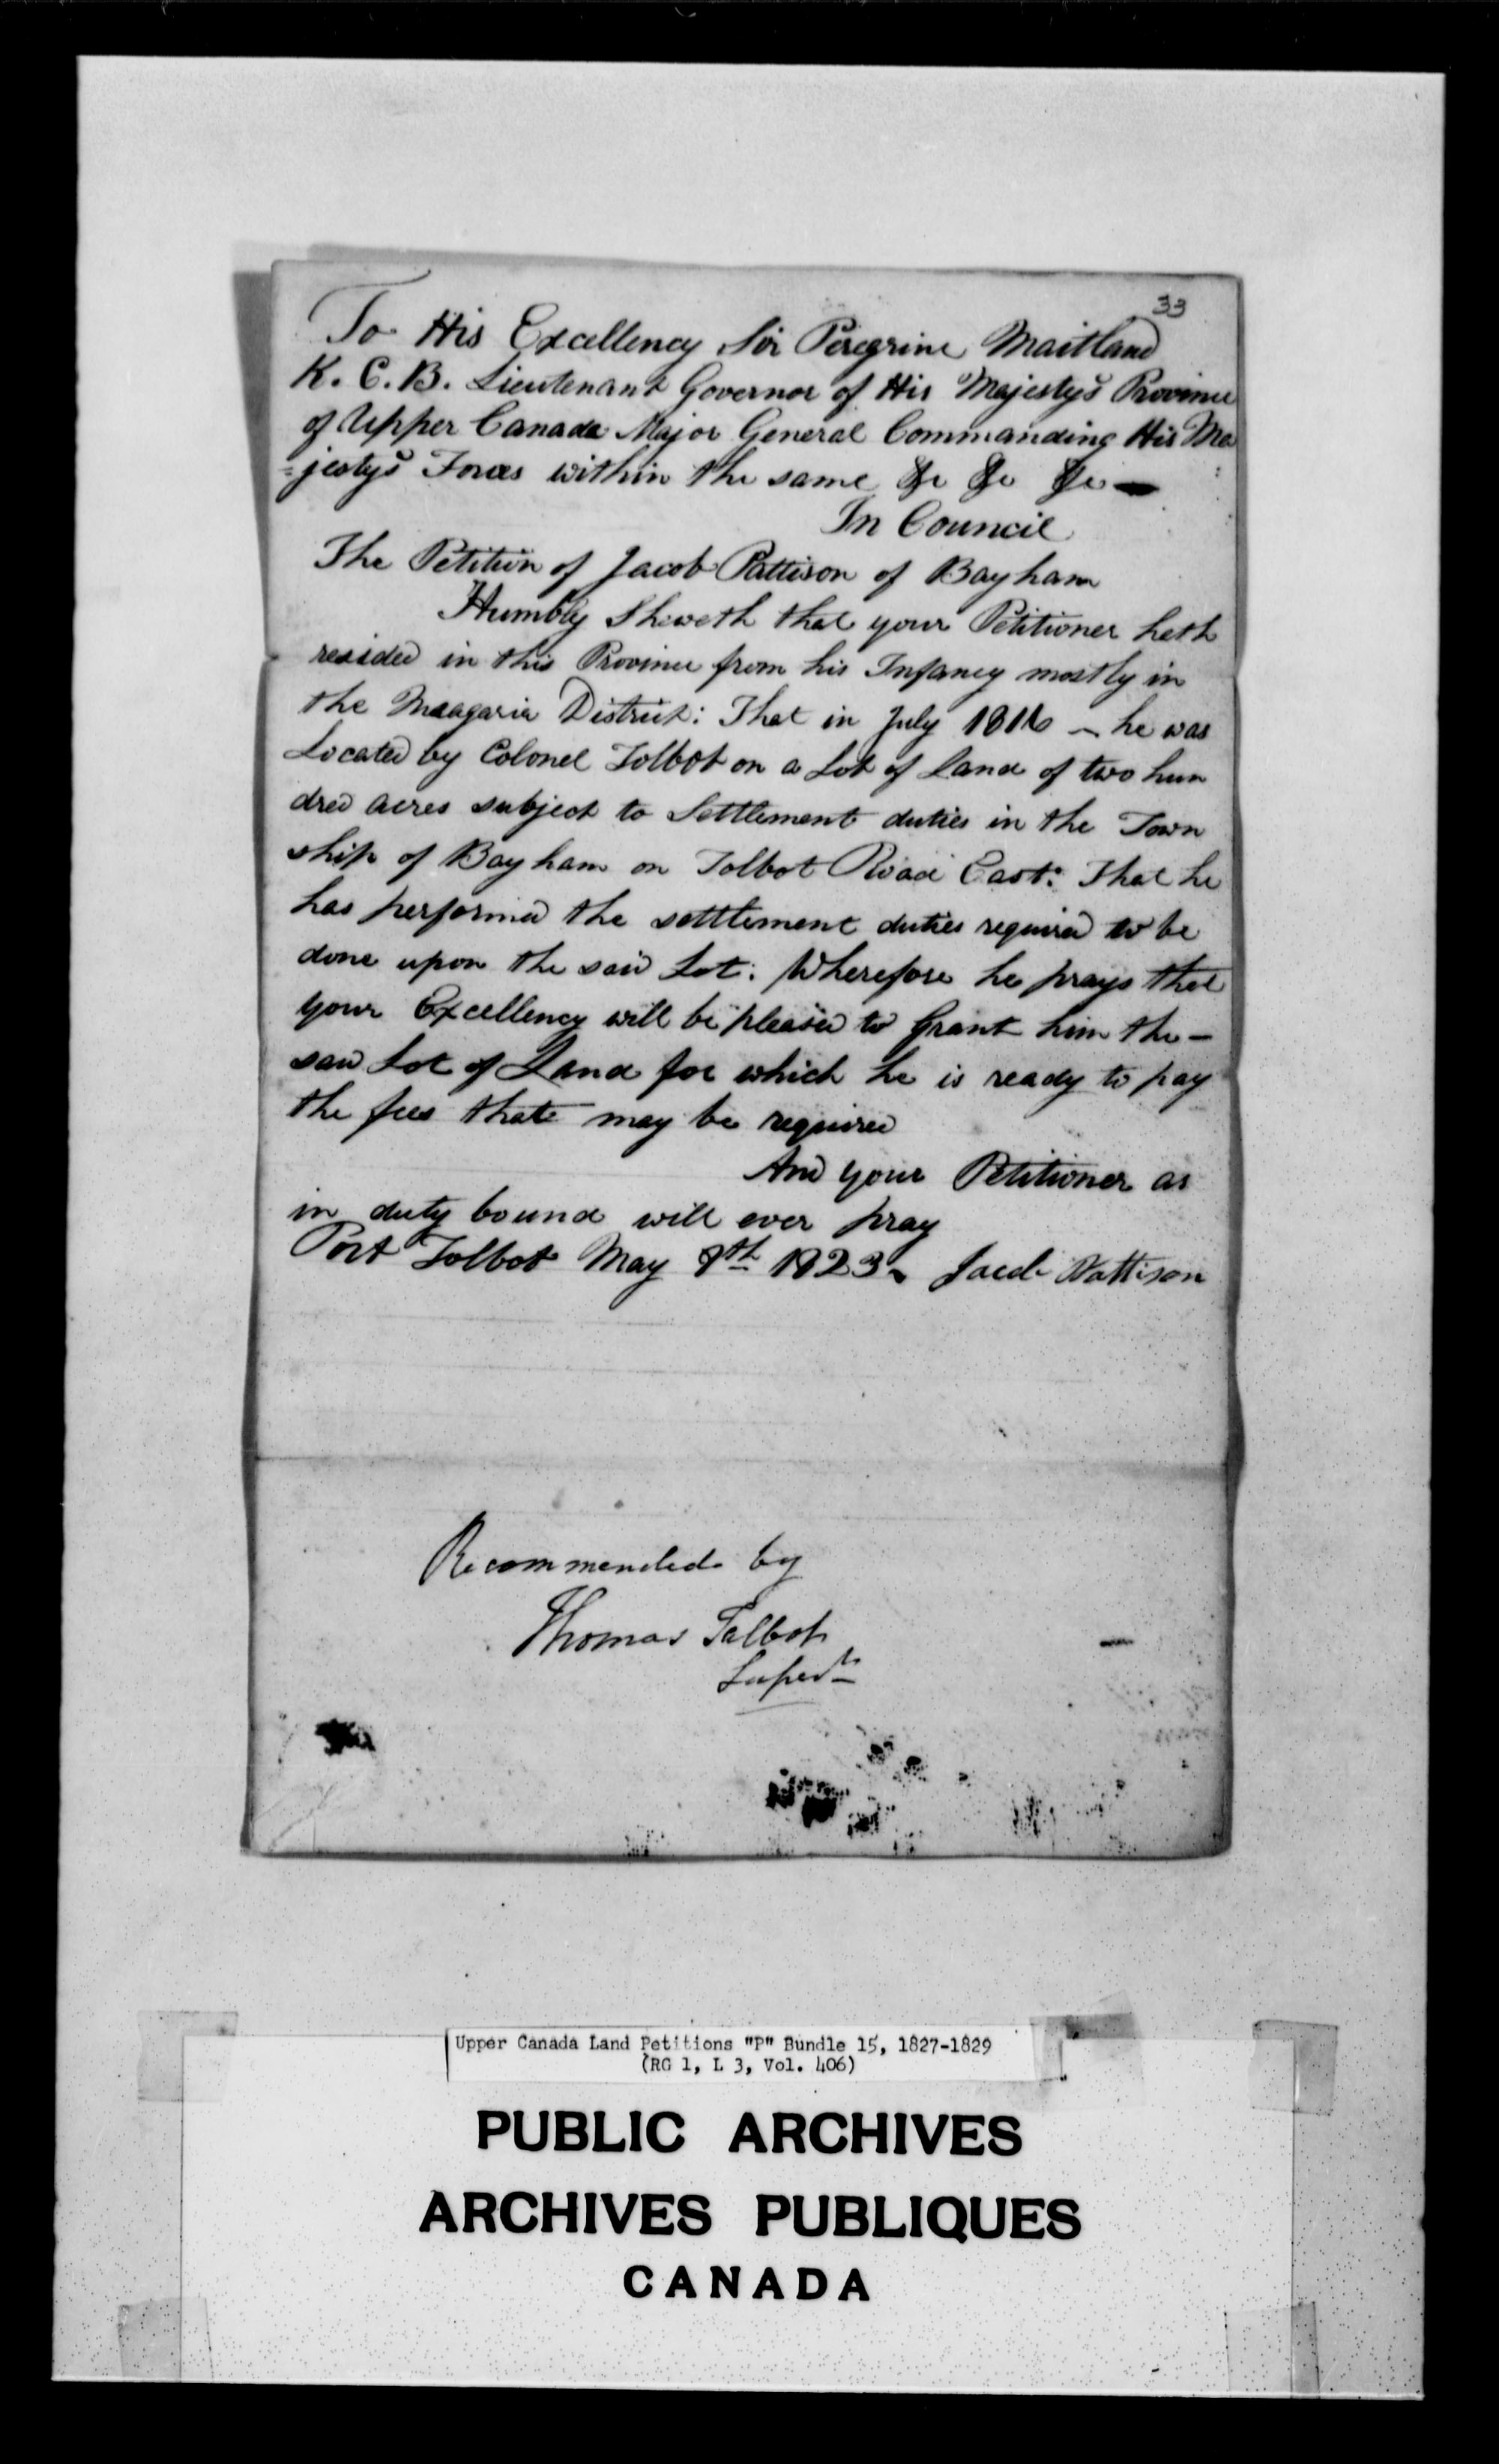 Title: Upper Canada Land Petitions (1763-1865) - Mikan Number: 205131 - Microform: c-2492